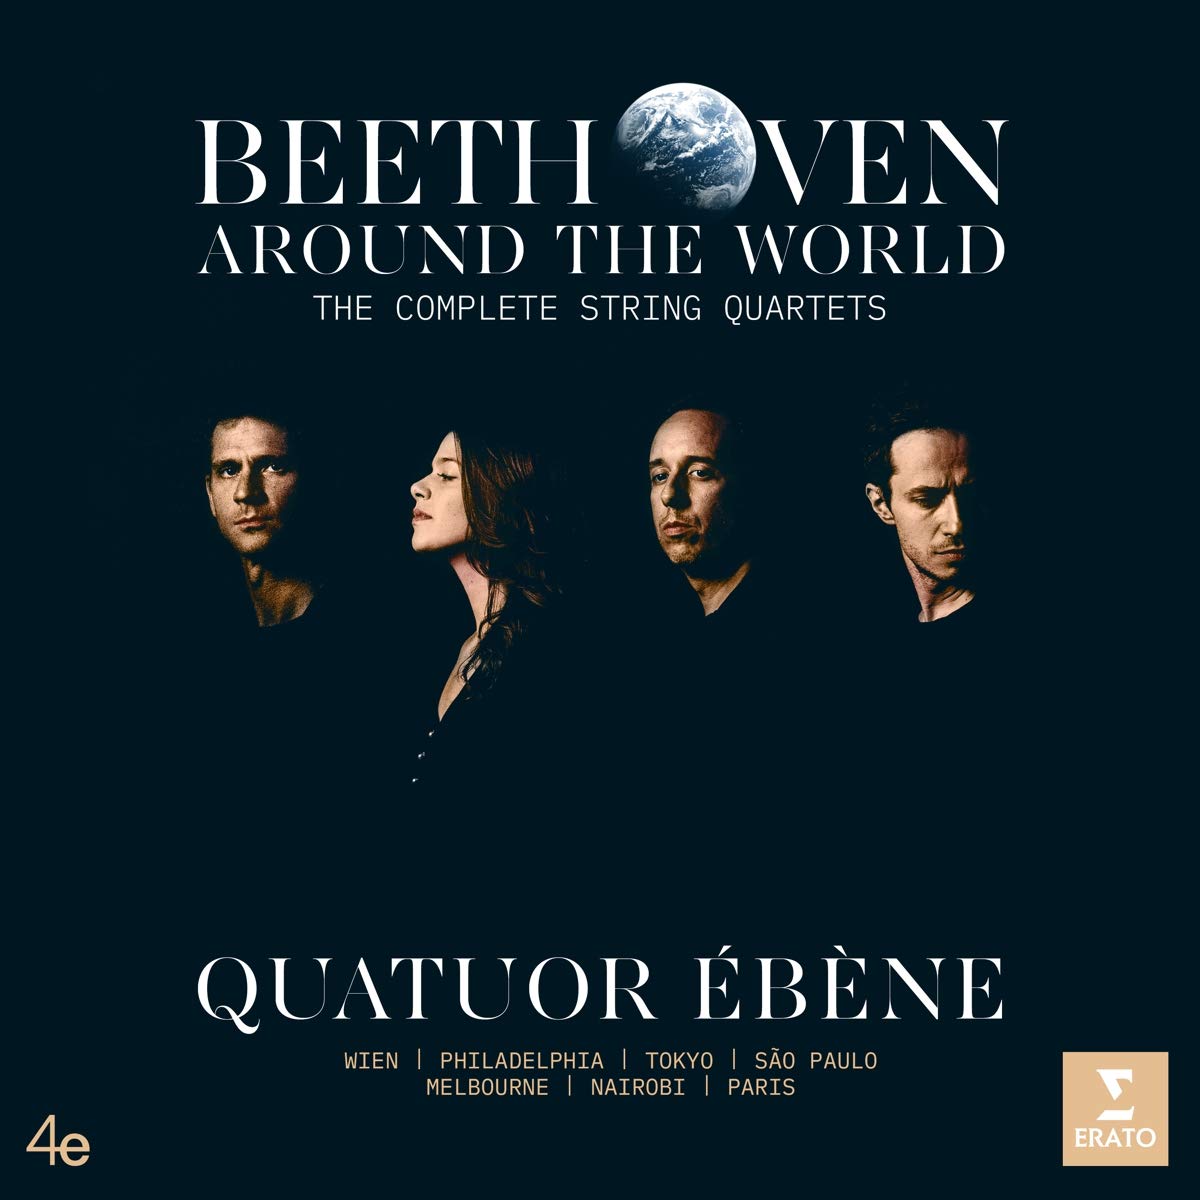 Beethoven Around the World: The Complete String Quartets - Quatuor Ebene (7 CDs)